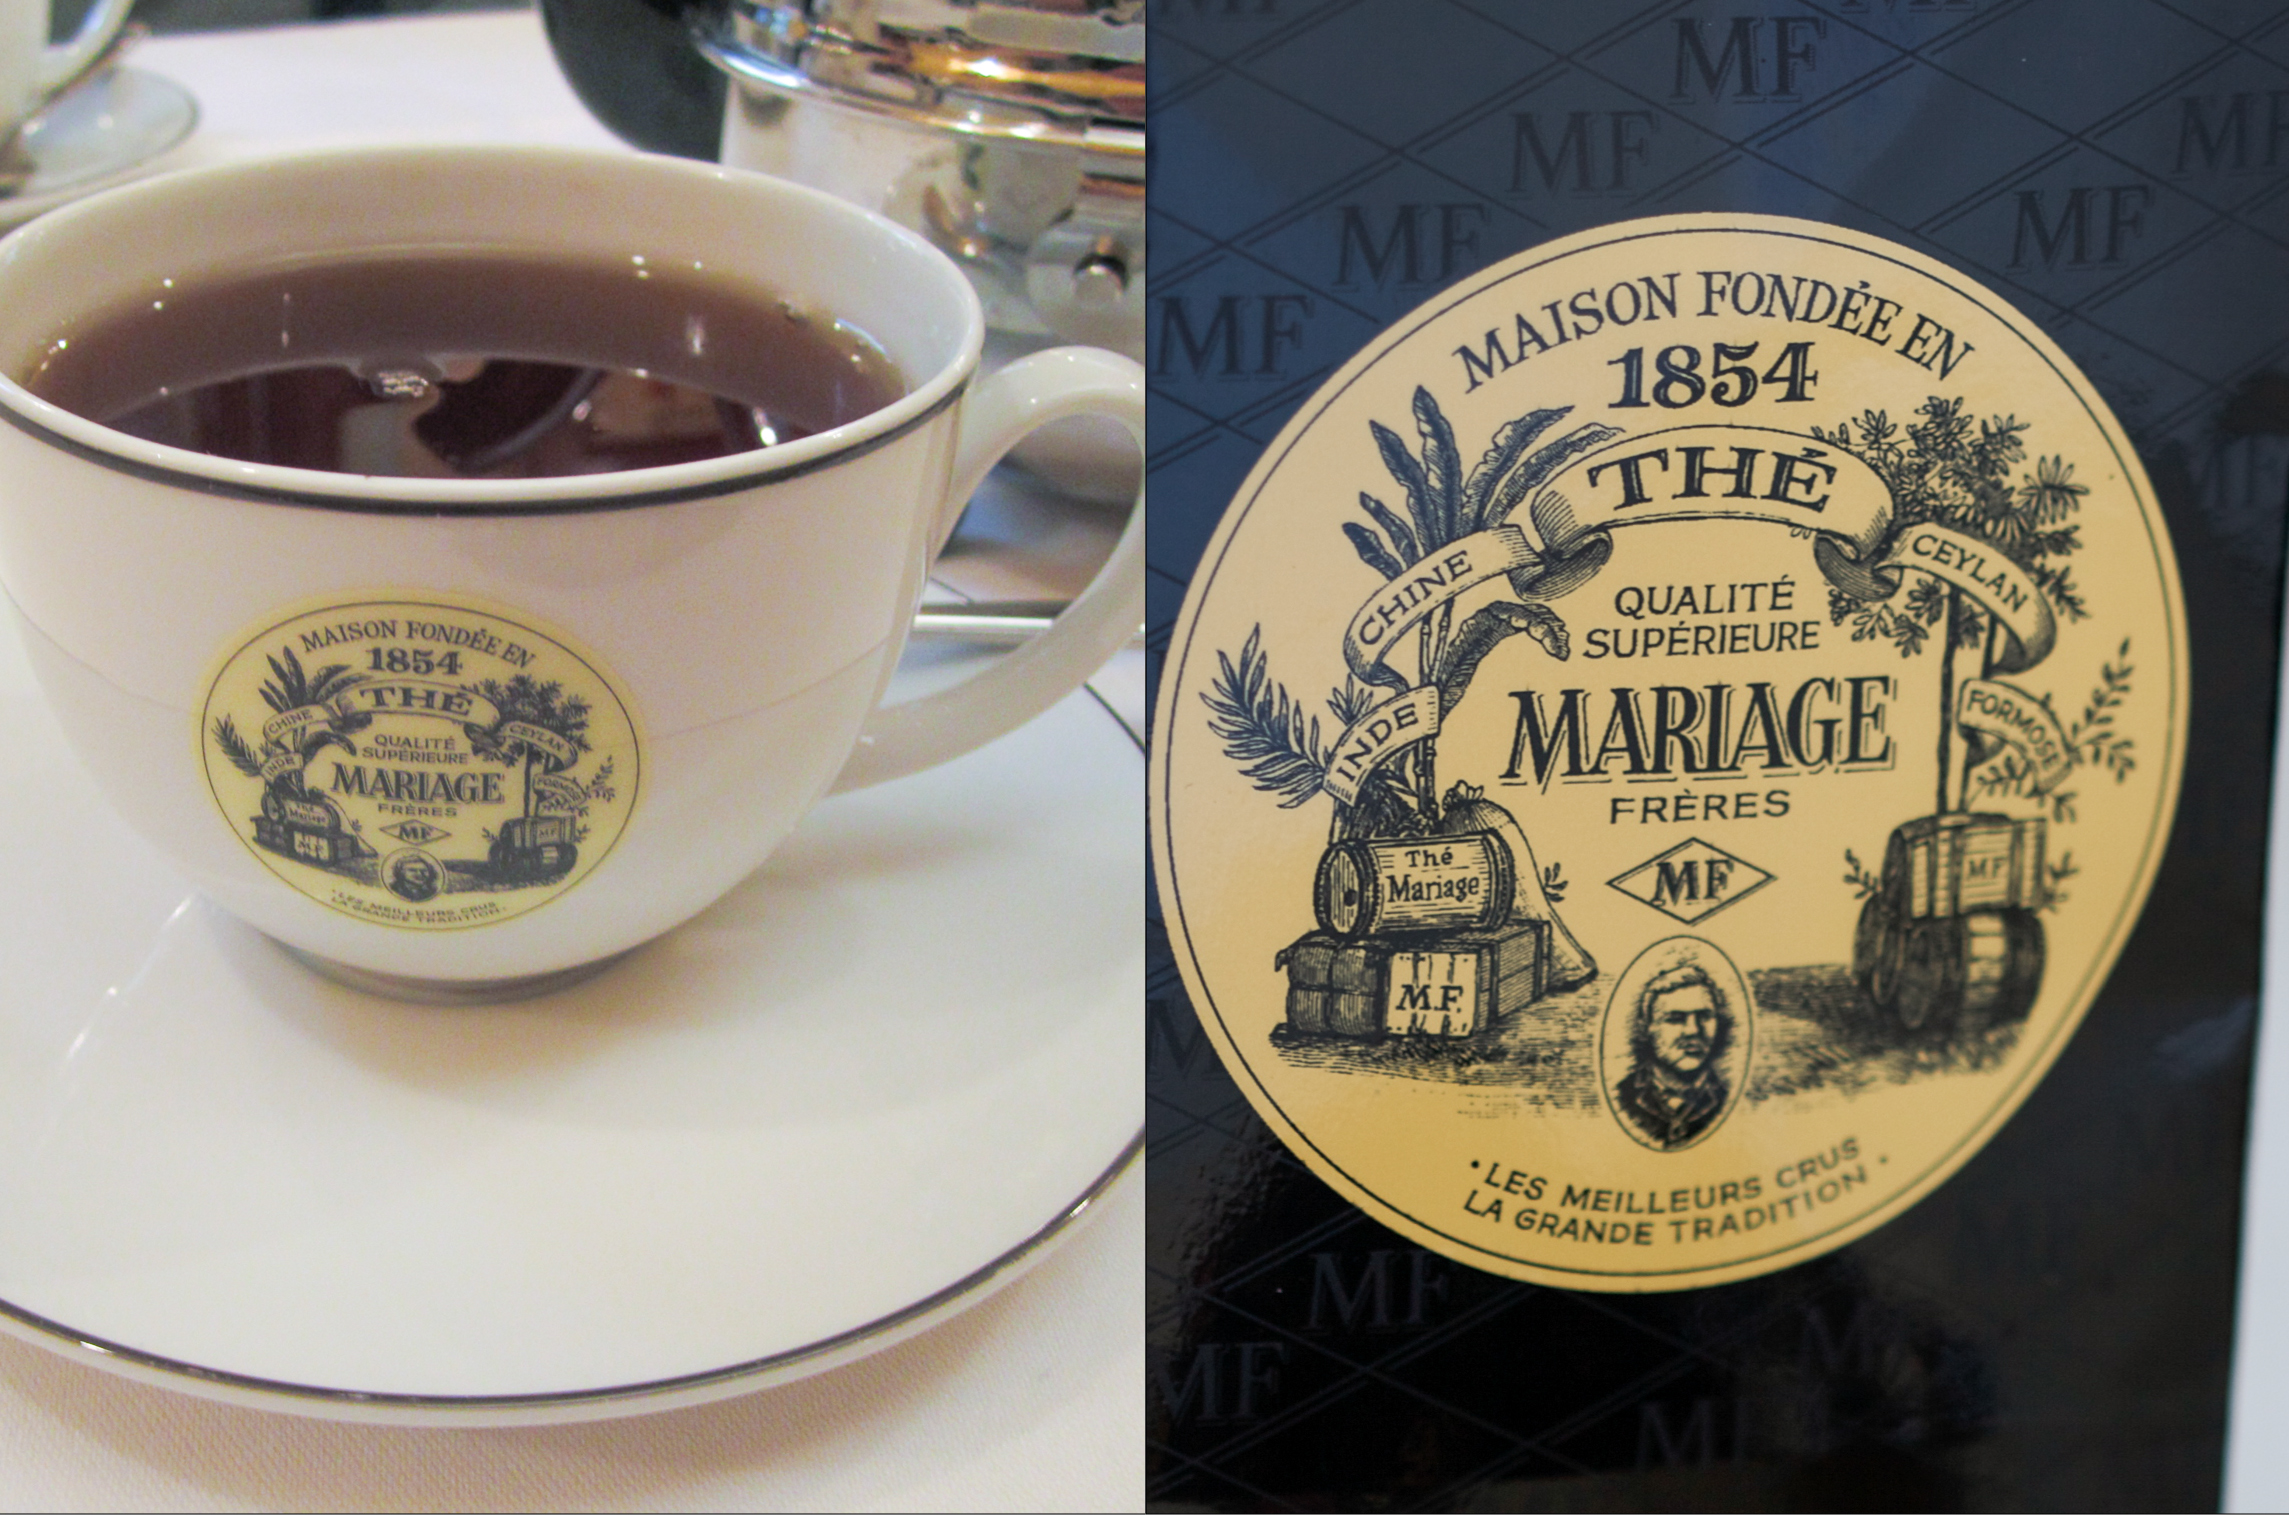 You can now sip Mariage Frères tea at Dean & Deluca